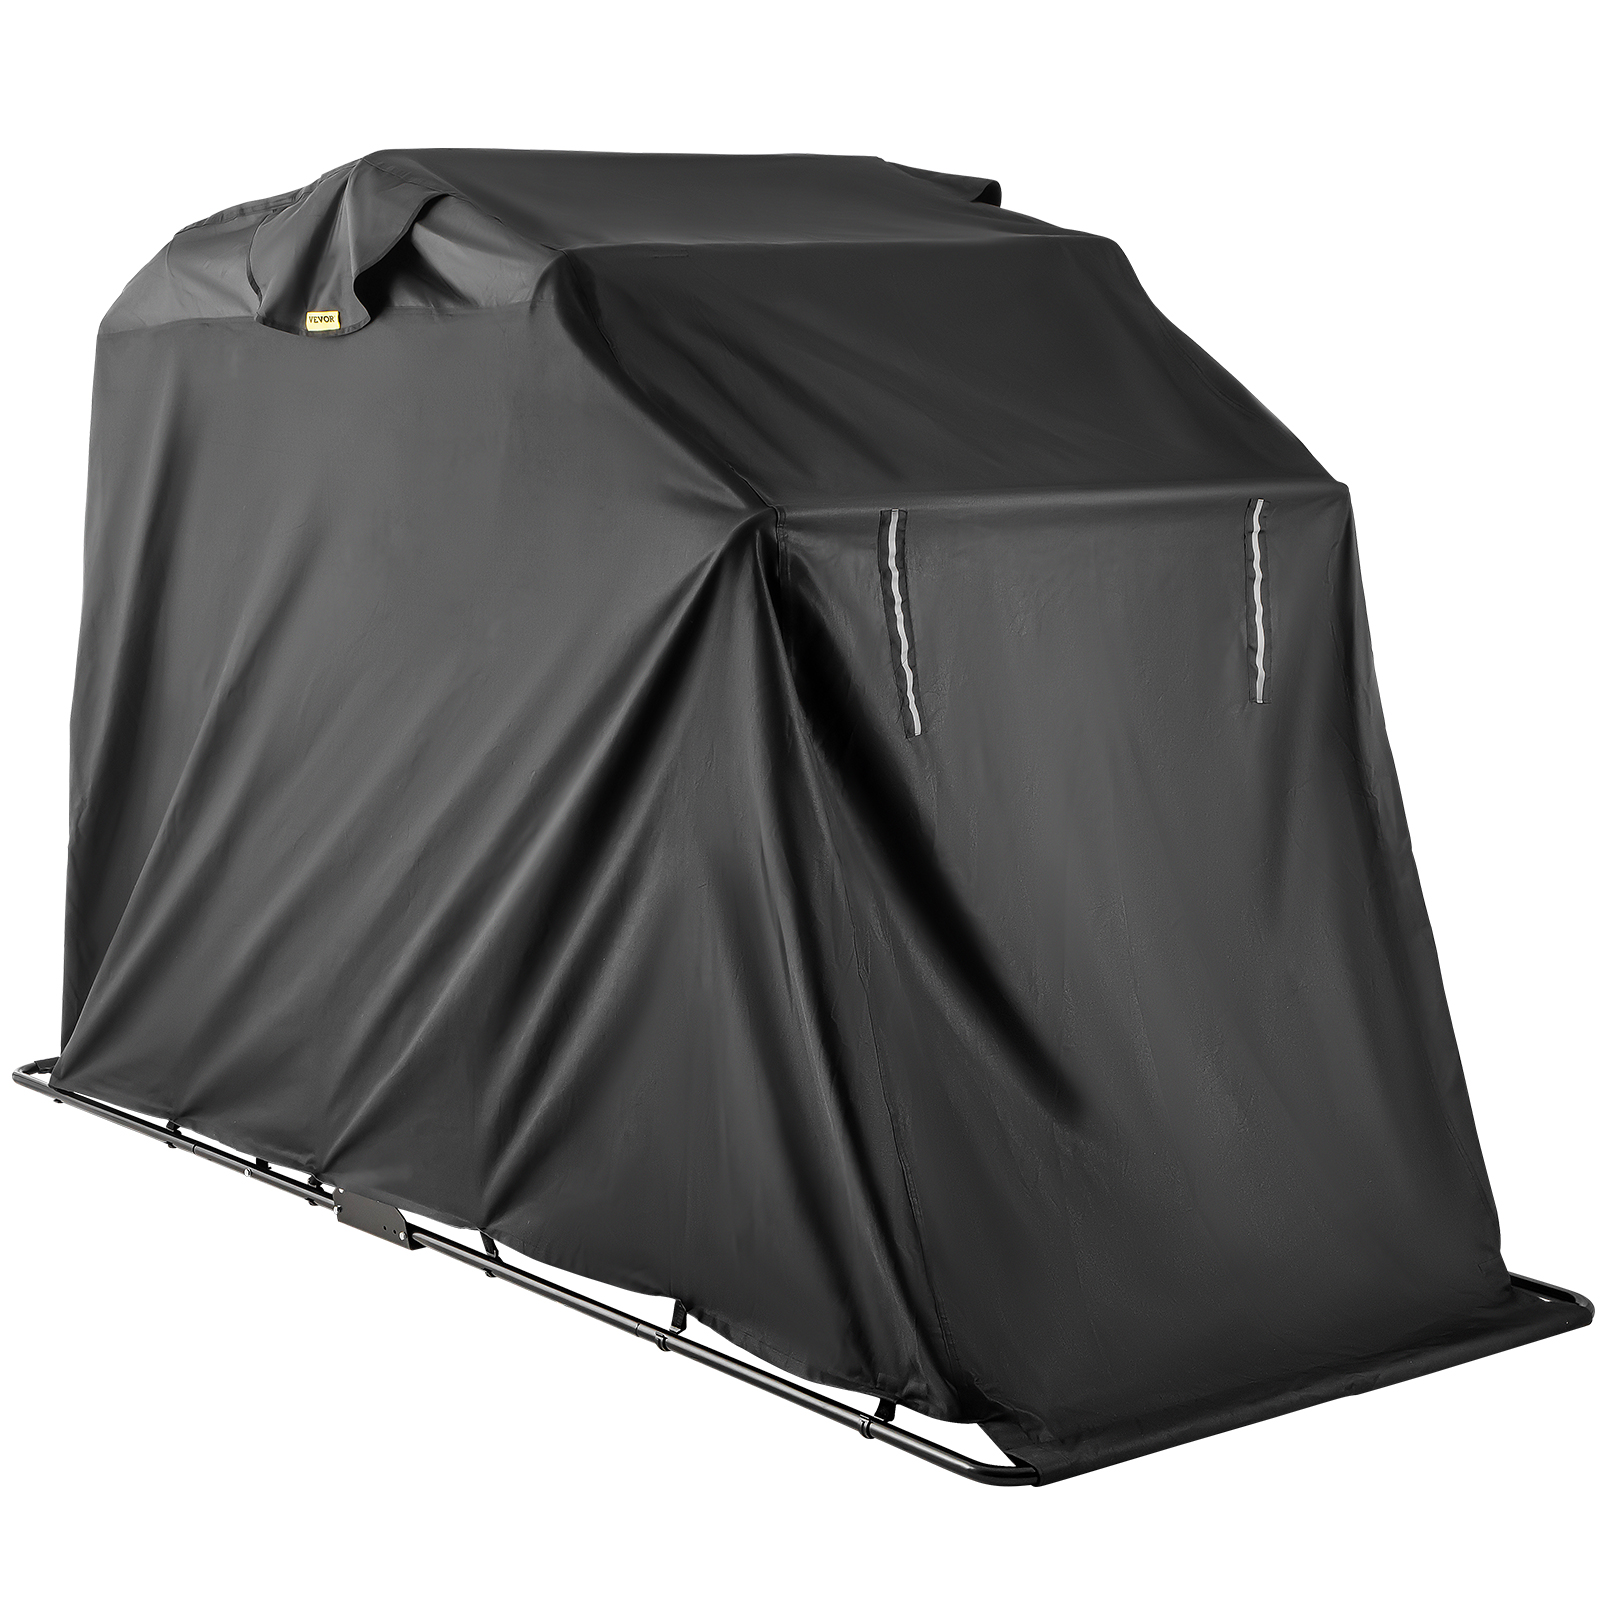 Cover,Shelter,Tent